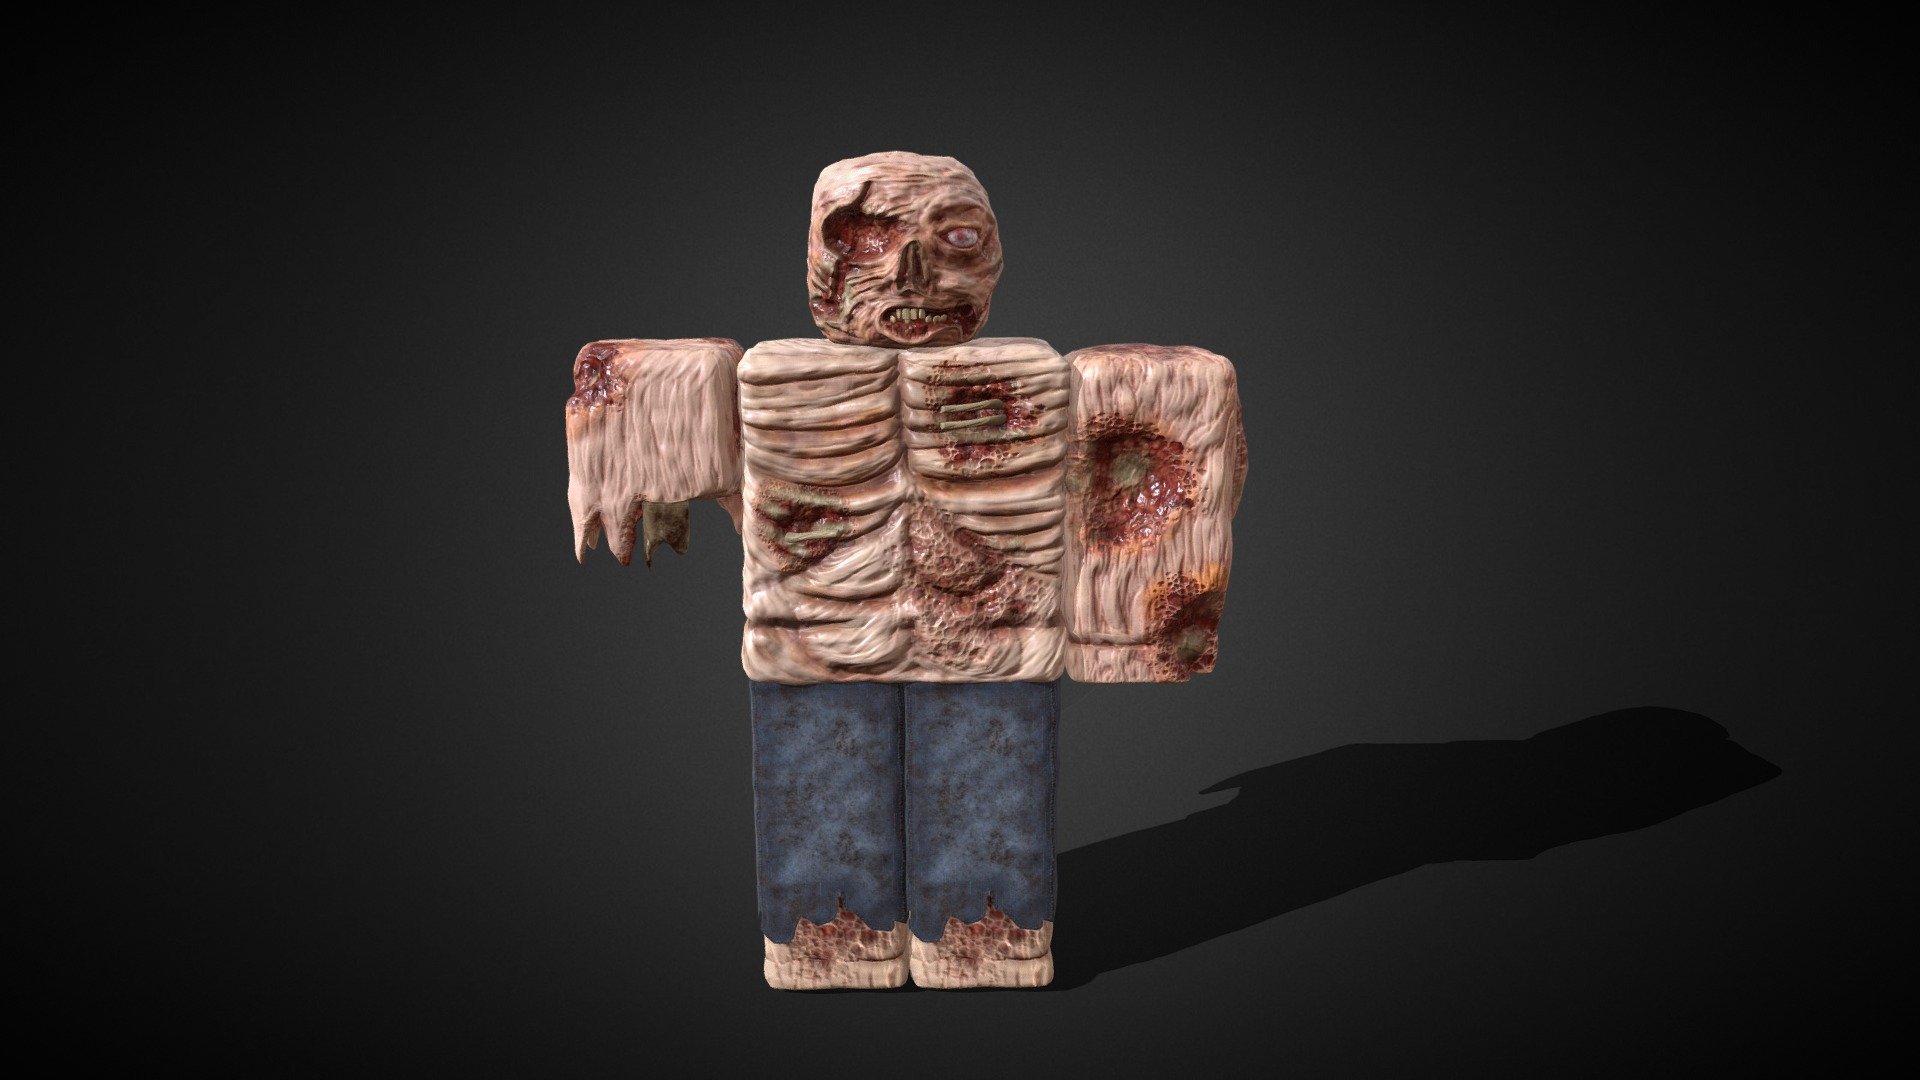 this zombie is made in blender textured in adobe substance 3d painter used in roblox - Zombie/Roblox - 3D model by barol.og 3d model